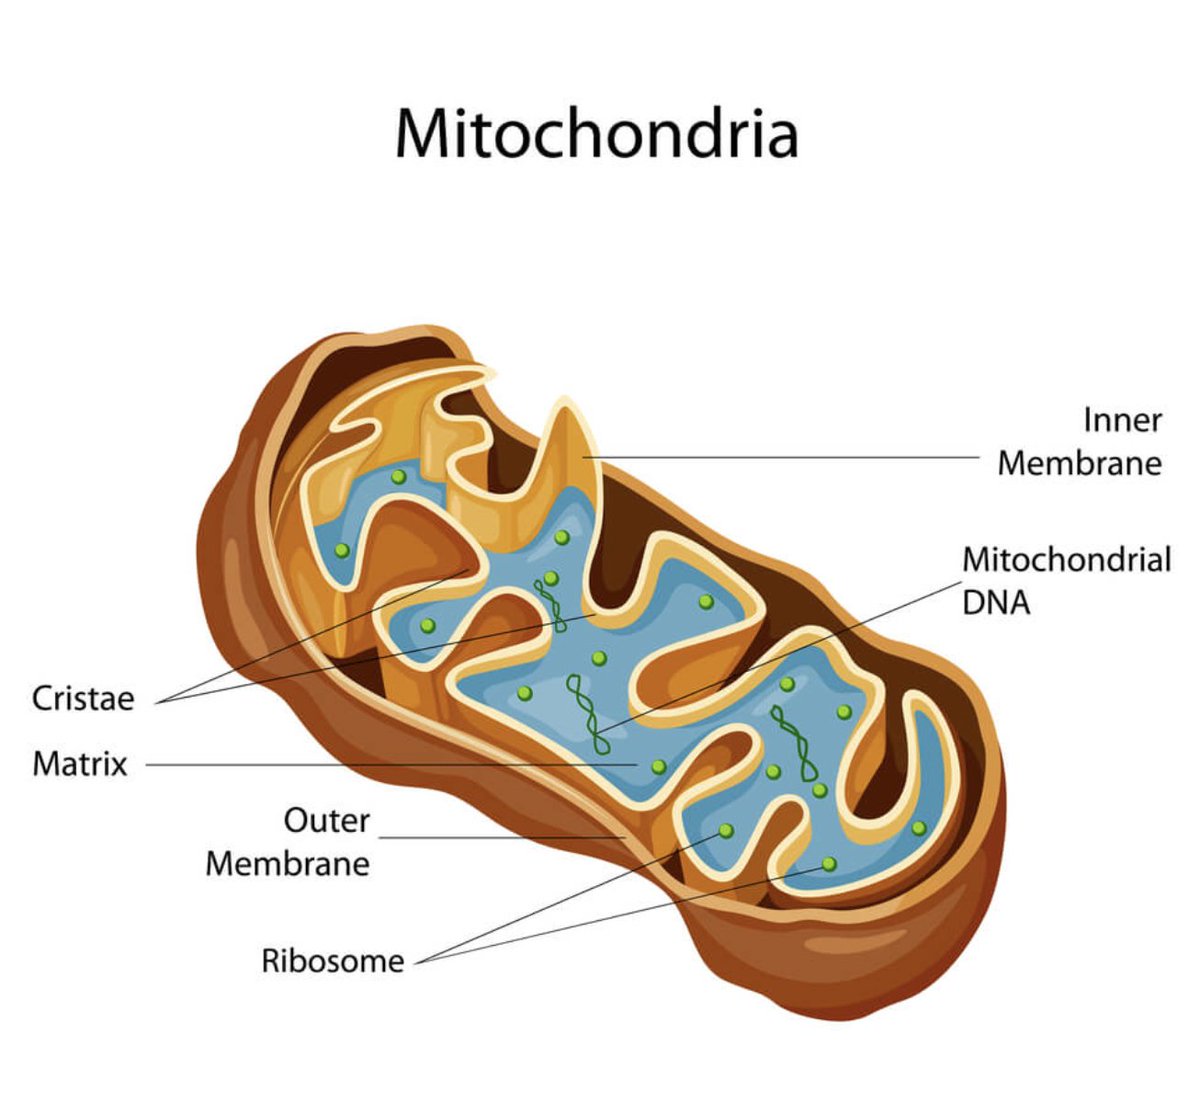 When you build muscle, even if you lose it, the mitochondria of the cell will stick around.Once you resume training, it will come ROARING back. I once was laid up with a hurt elbow for 3, full weeks. My weight remained unchanged the entire time.